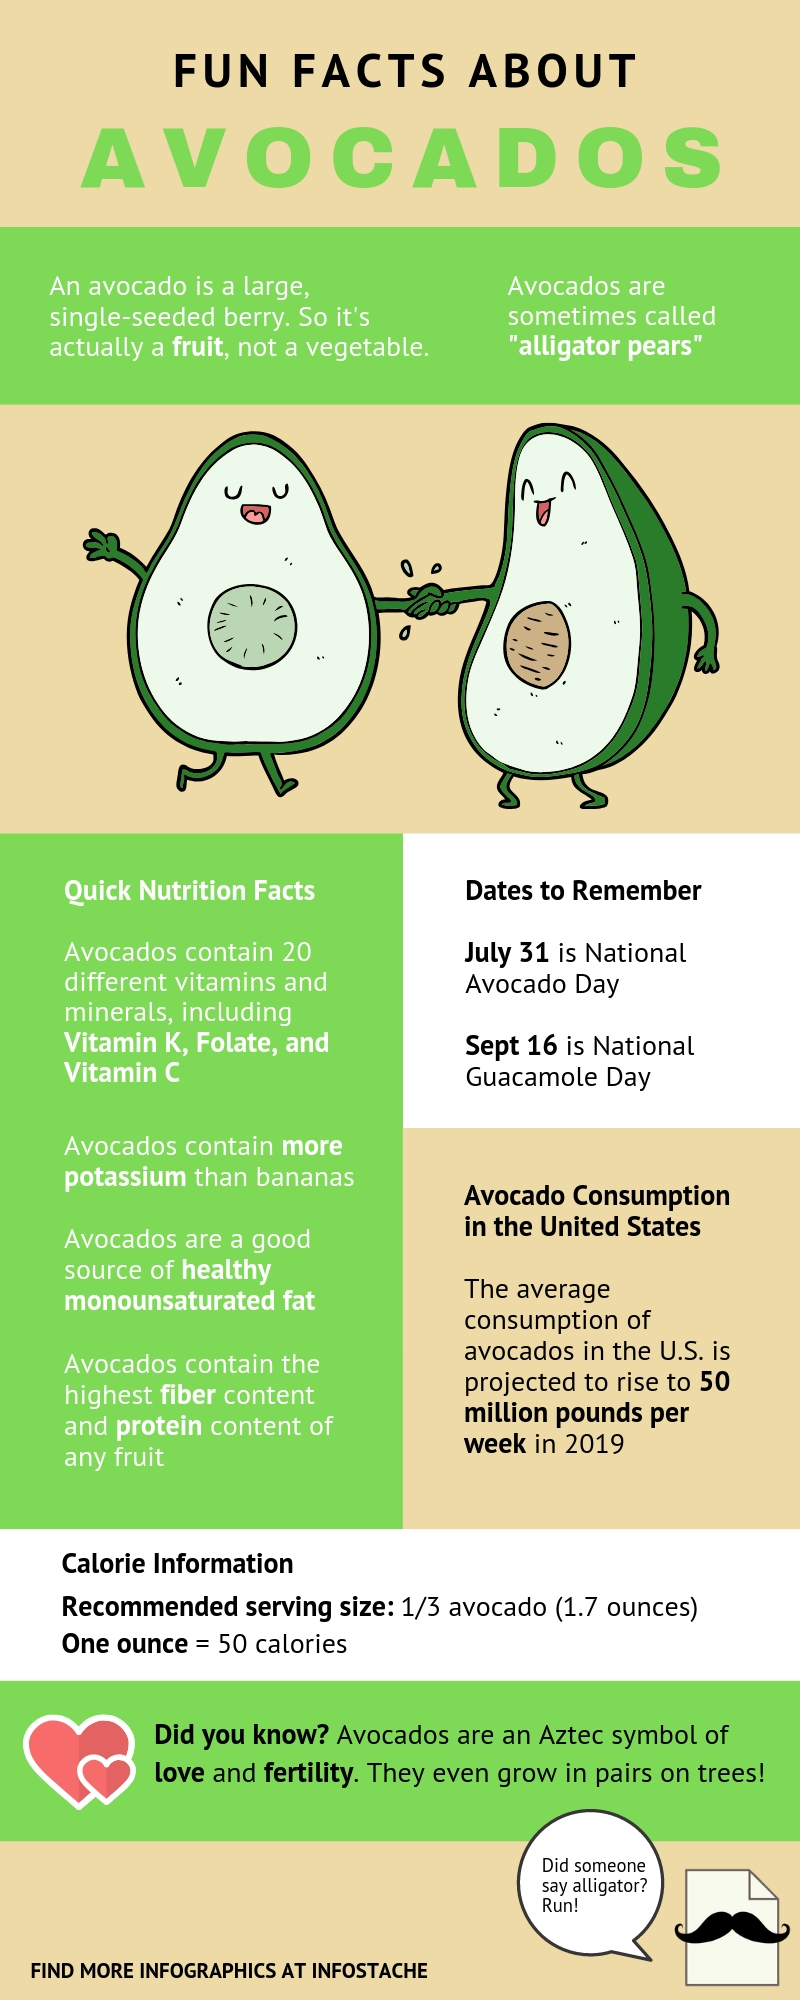 Fun Facts About Avocados - Infographic